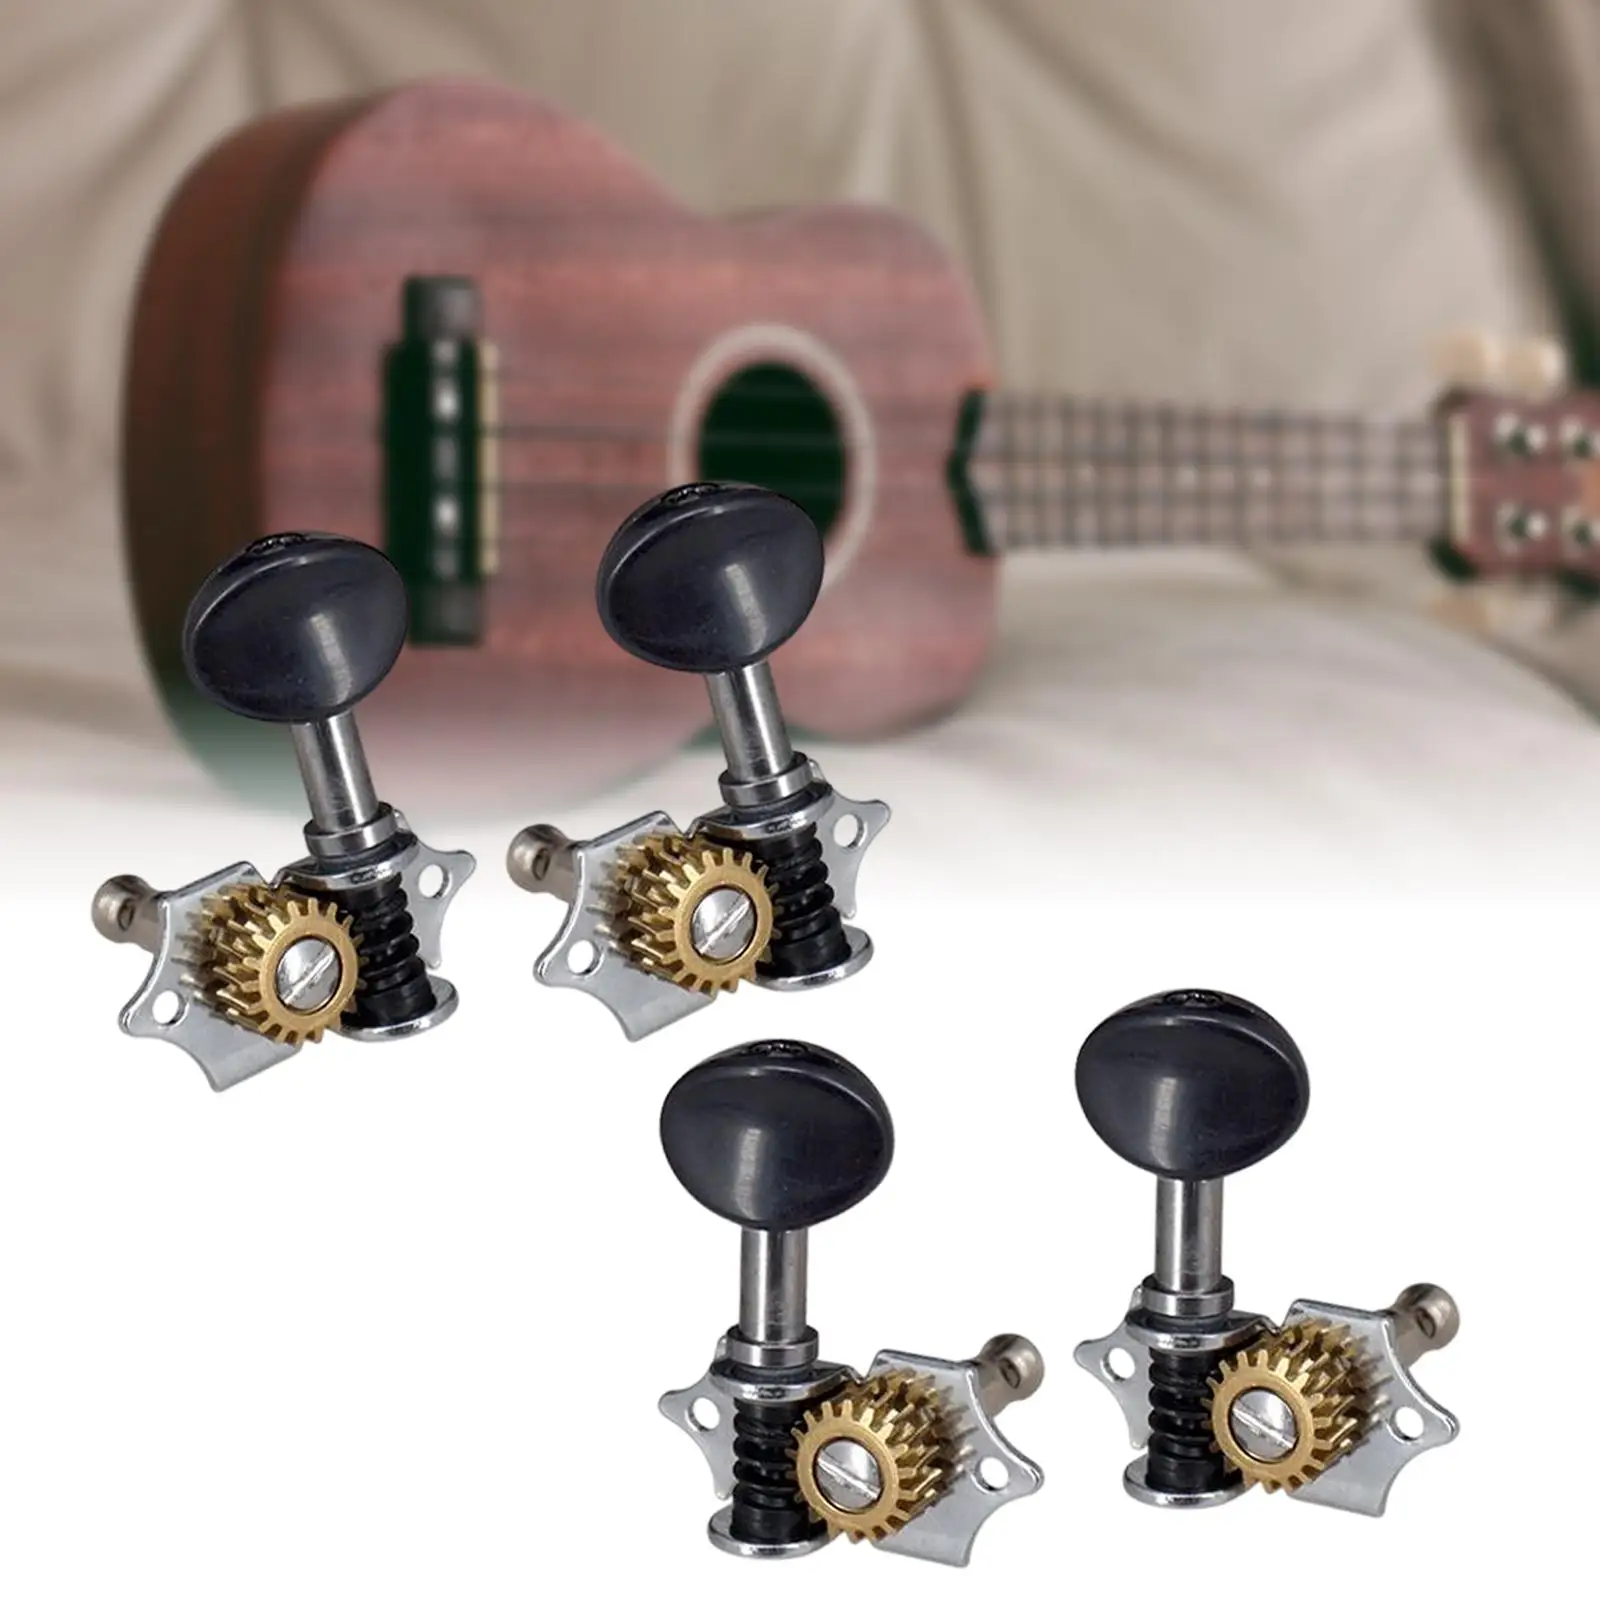 4Pcs 1:18 Ukulele Tuning Pegs Guitar Accessories Replaces Ukulele DIY Parts machine Heads Small Concave Button Ukelele String